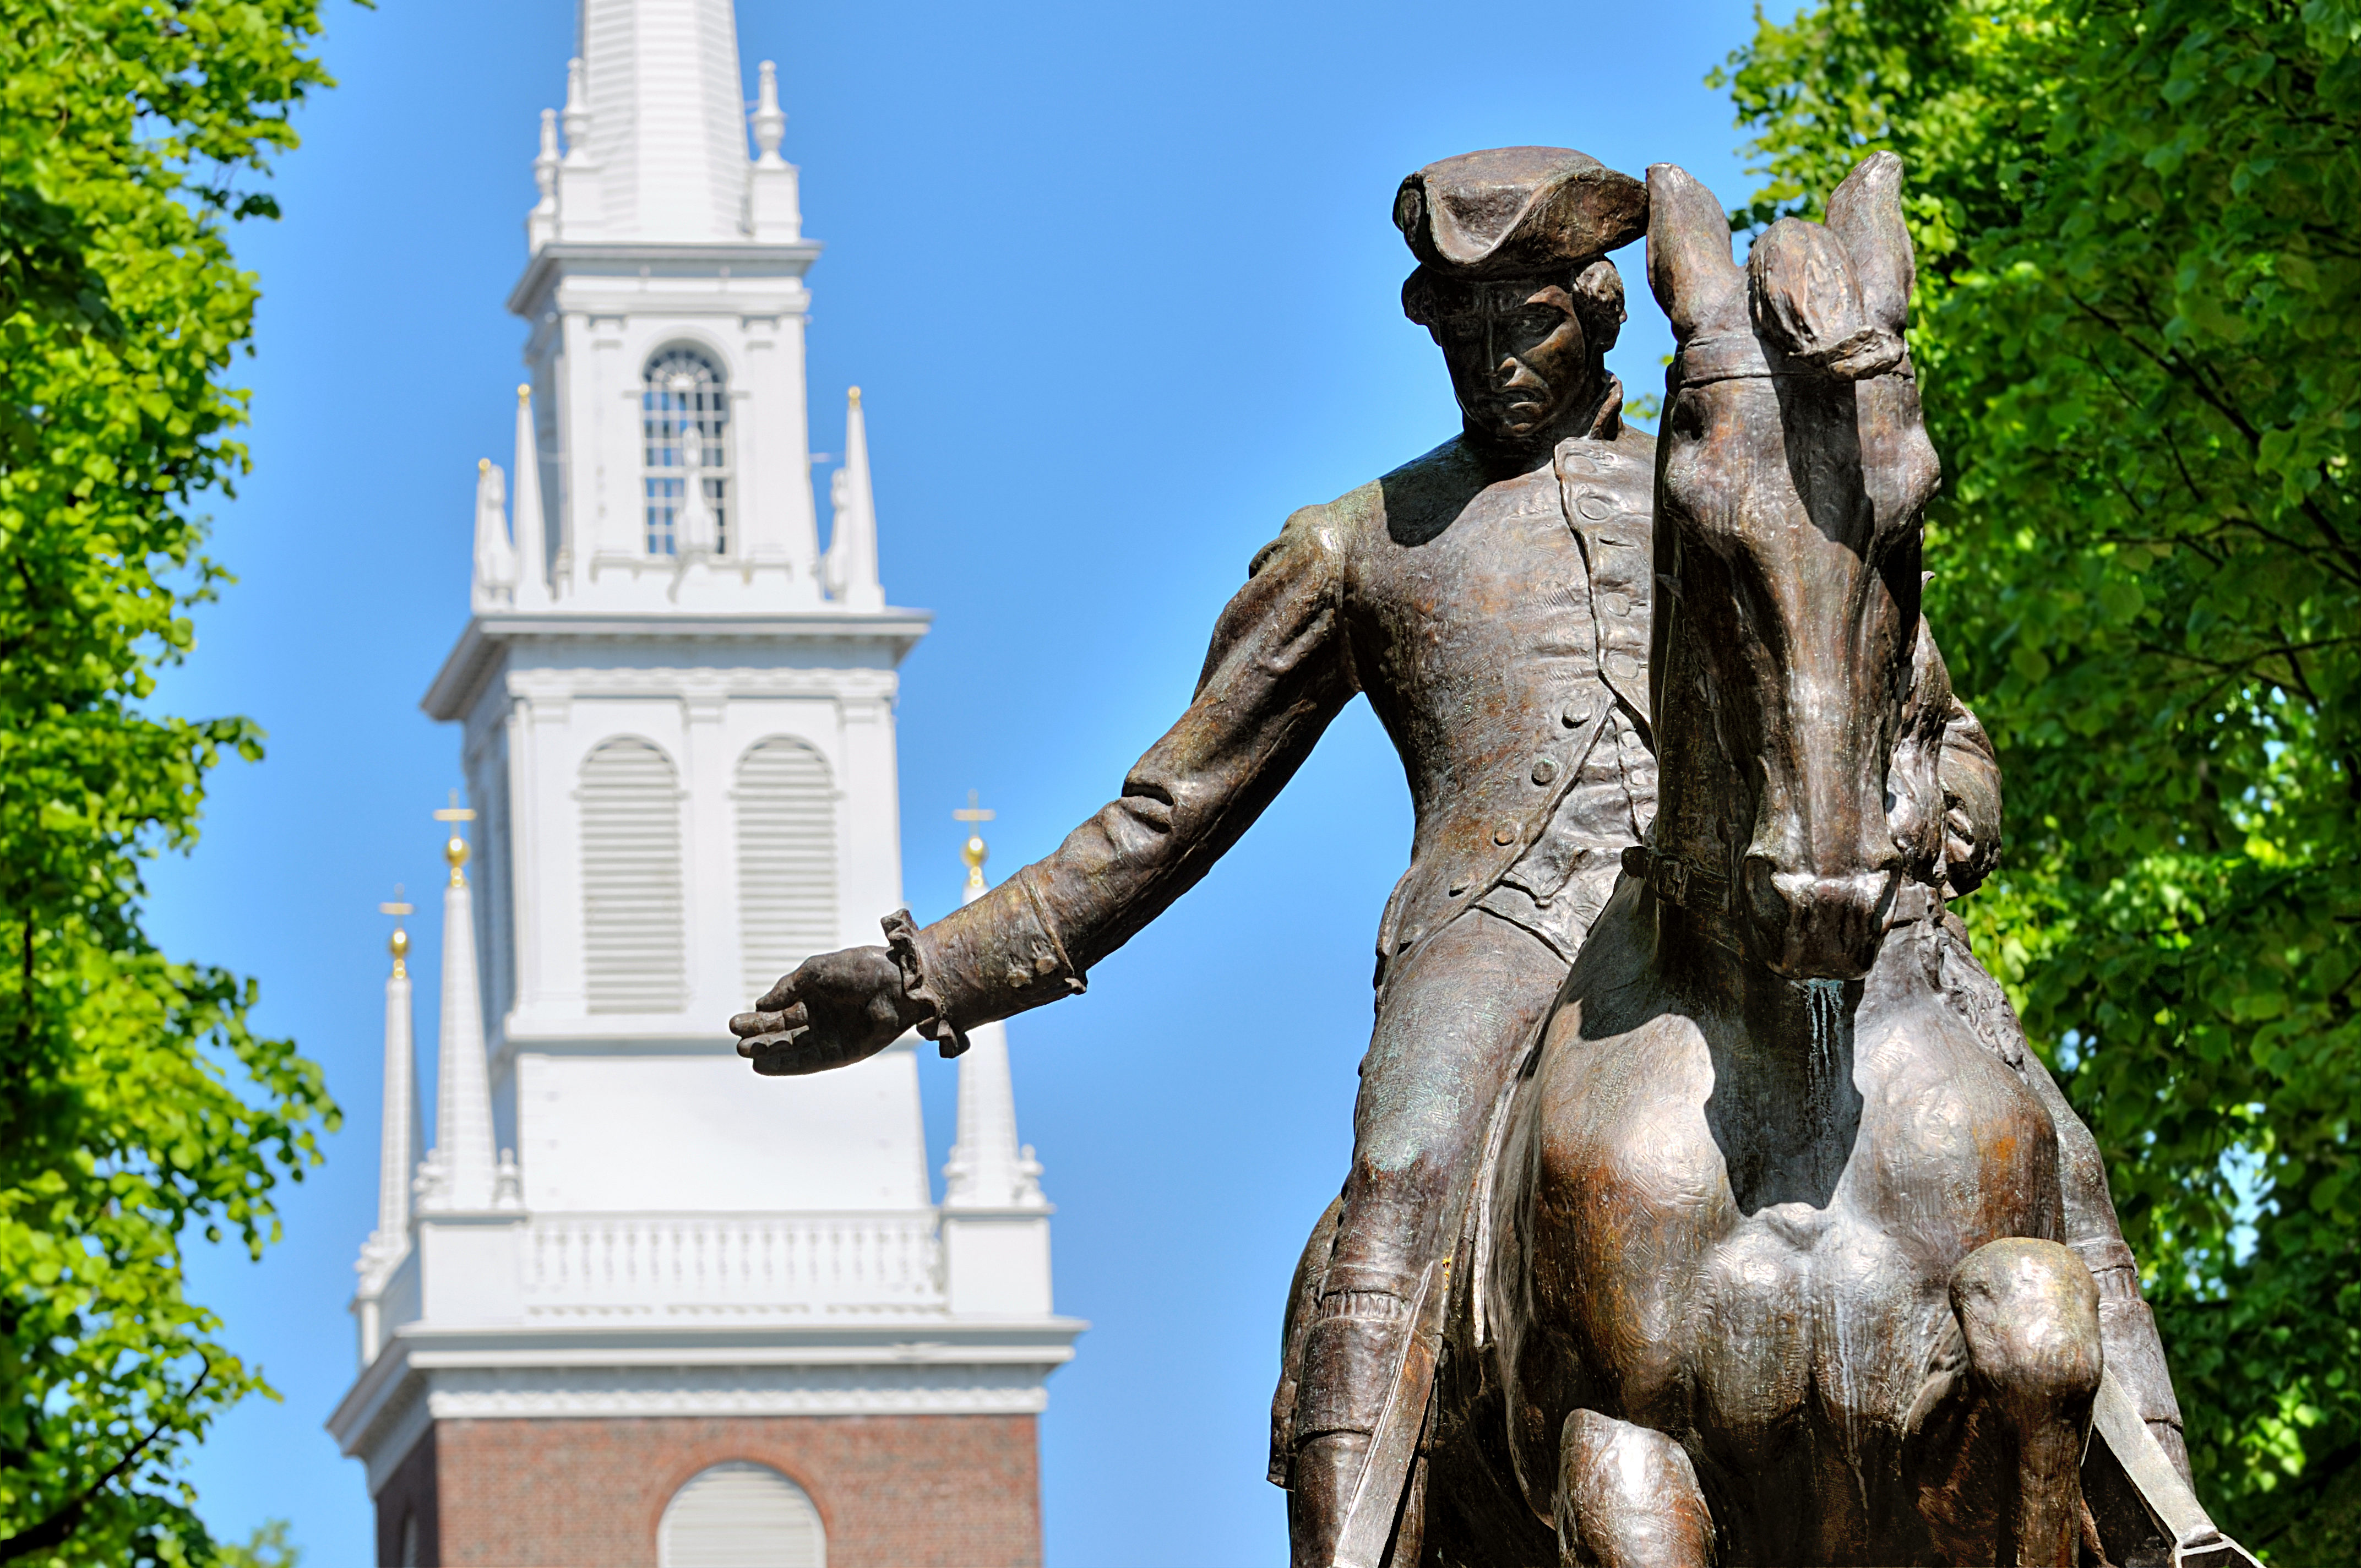 A statue of Paul Revere stands on the Freedom Trail, just outside the Old North Church. Image by Jorge Salcedo / Getty Images